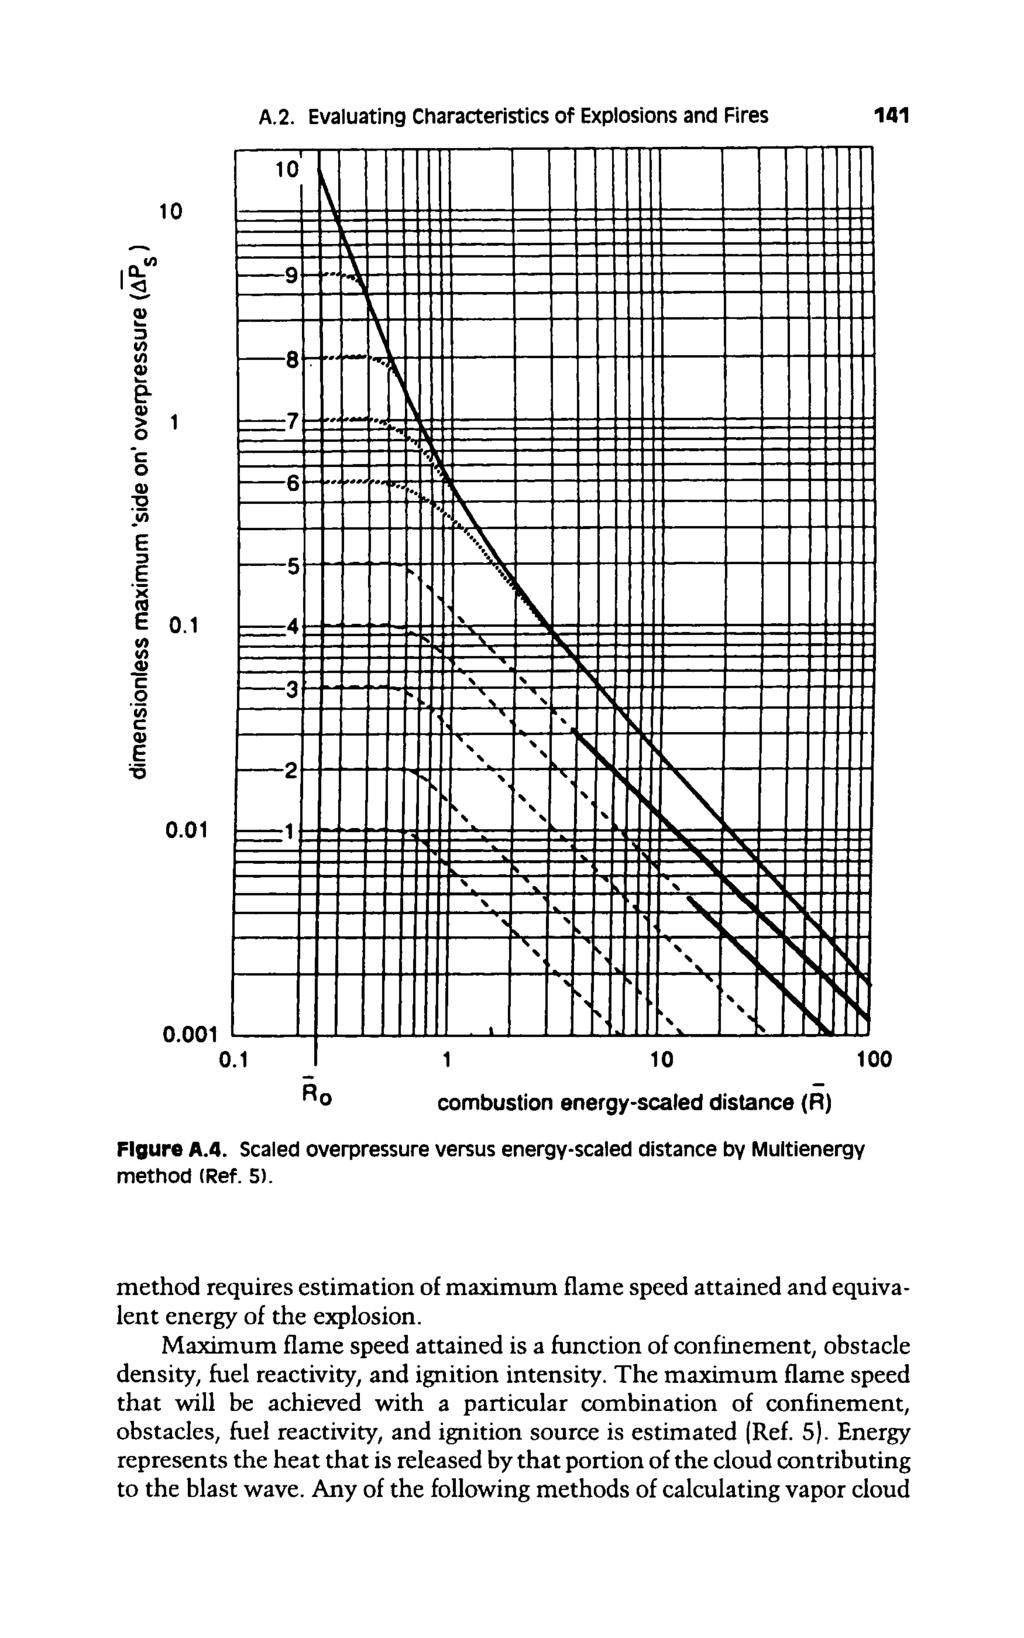 A.2. Evaluating Characteristics of Explosions and Fires 141 0.01 0.001 0.1 I 1 10 100 - combustion energy-scaled distance (R) Flgure A.4. Scaled overpressure versus energy-scaled distance by Multienergy method (Ref.